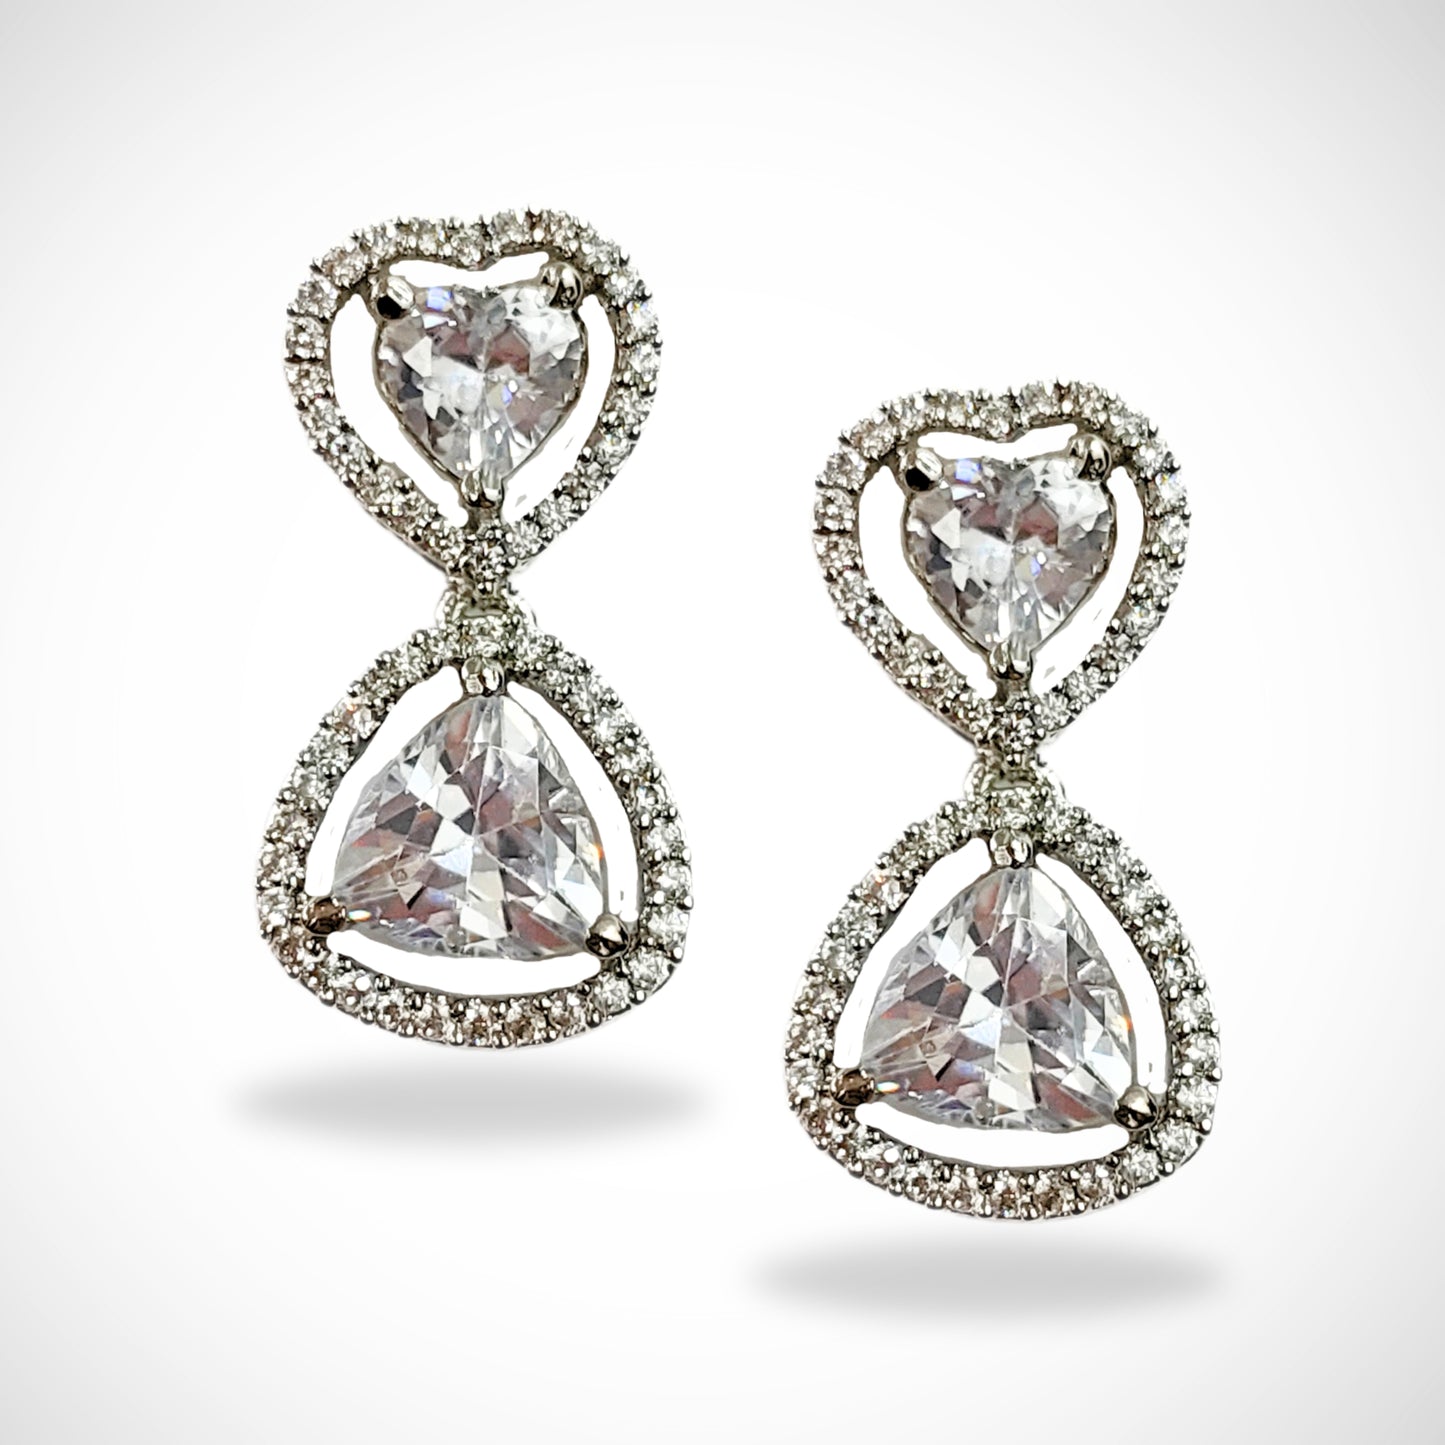 A Dazzling Gift for Her Illuminated with Brilliance